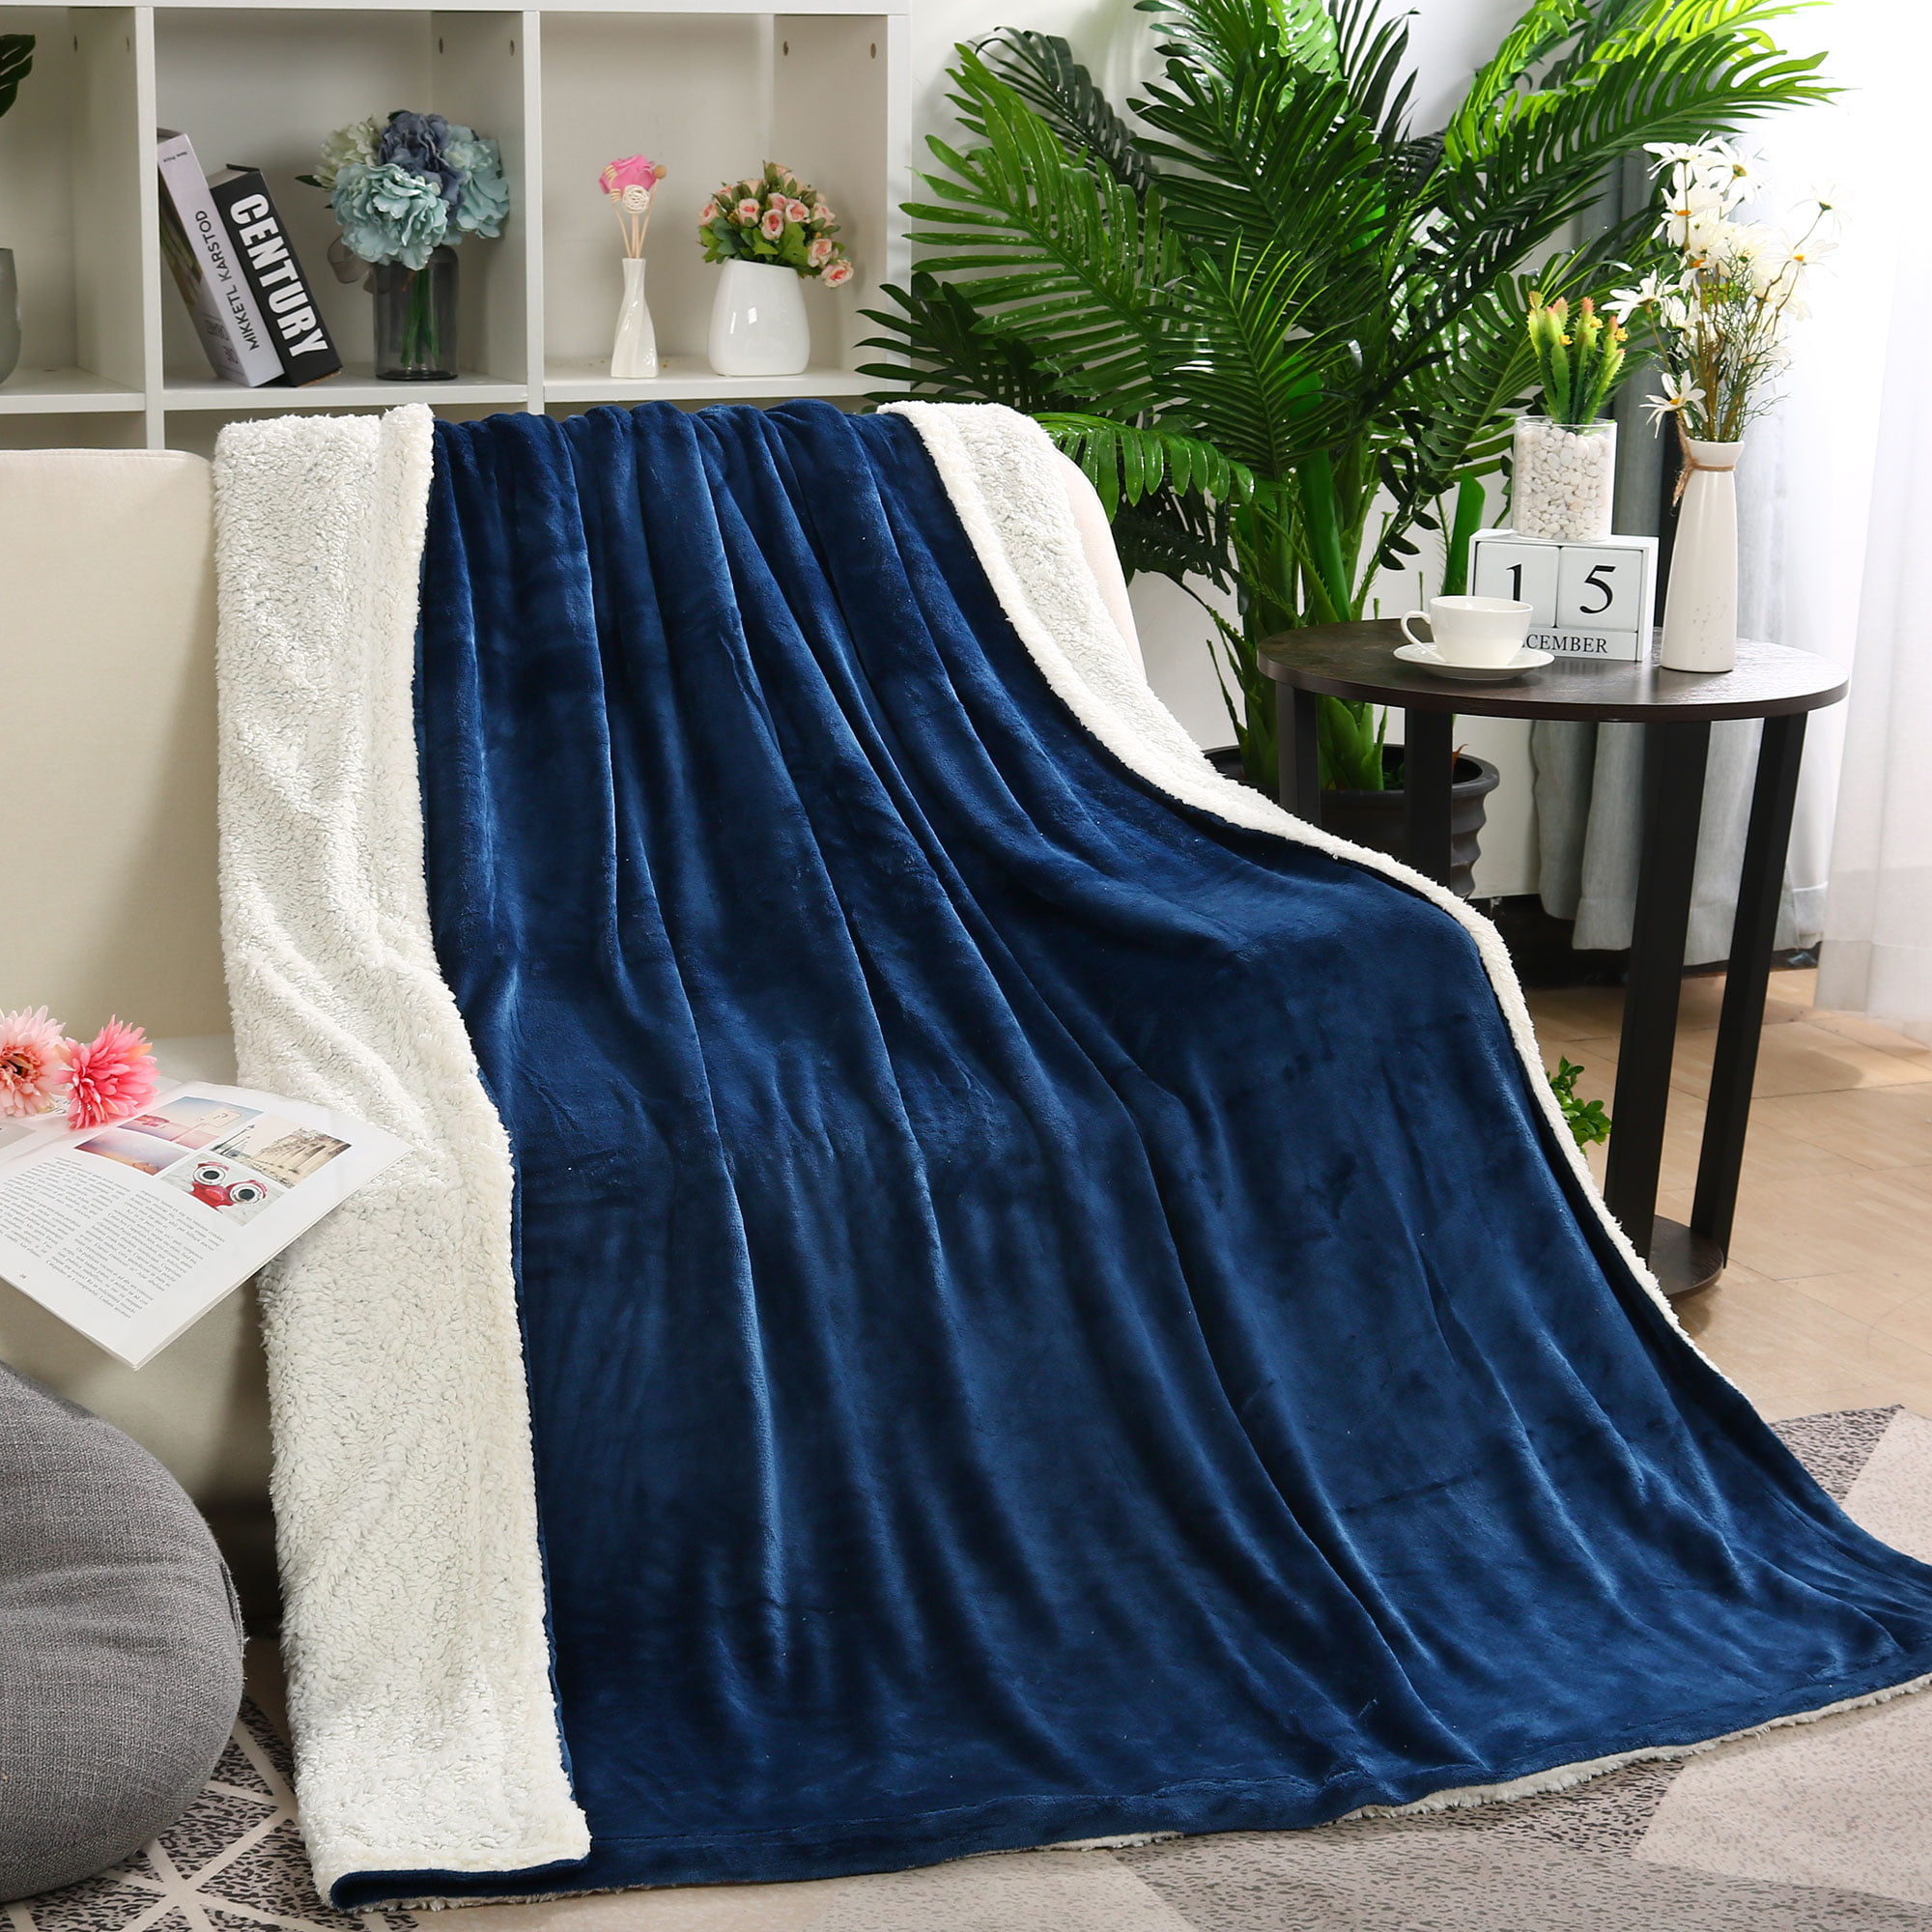 Details about   2020 Plush Blanket Soft Artificial Fur and Fluffy Blanket Home 